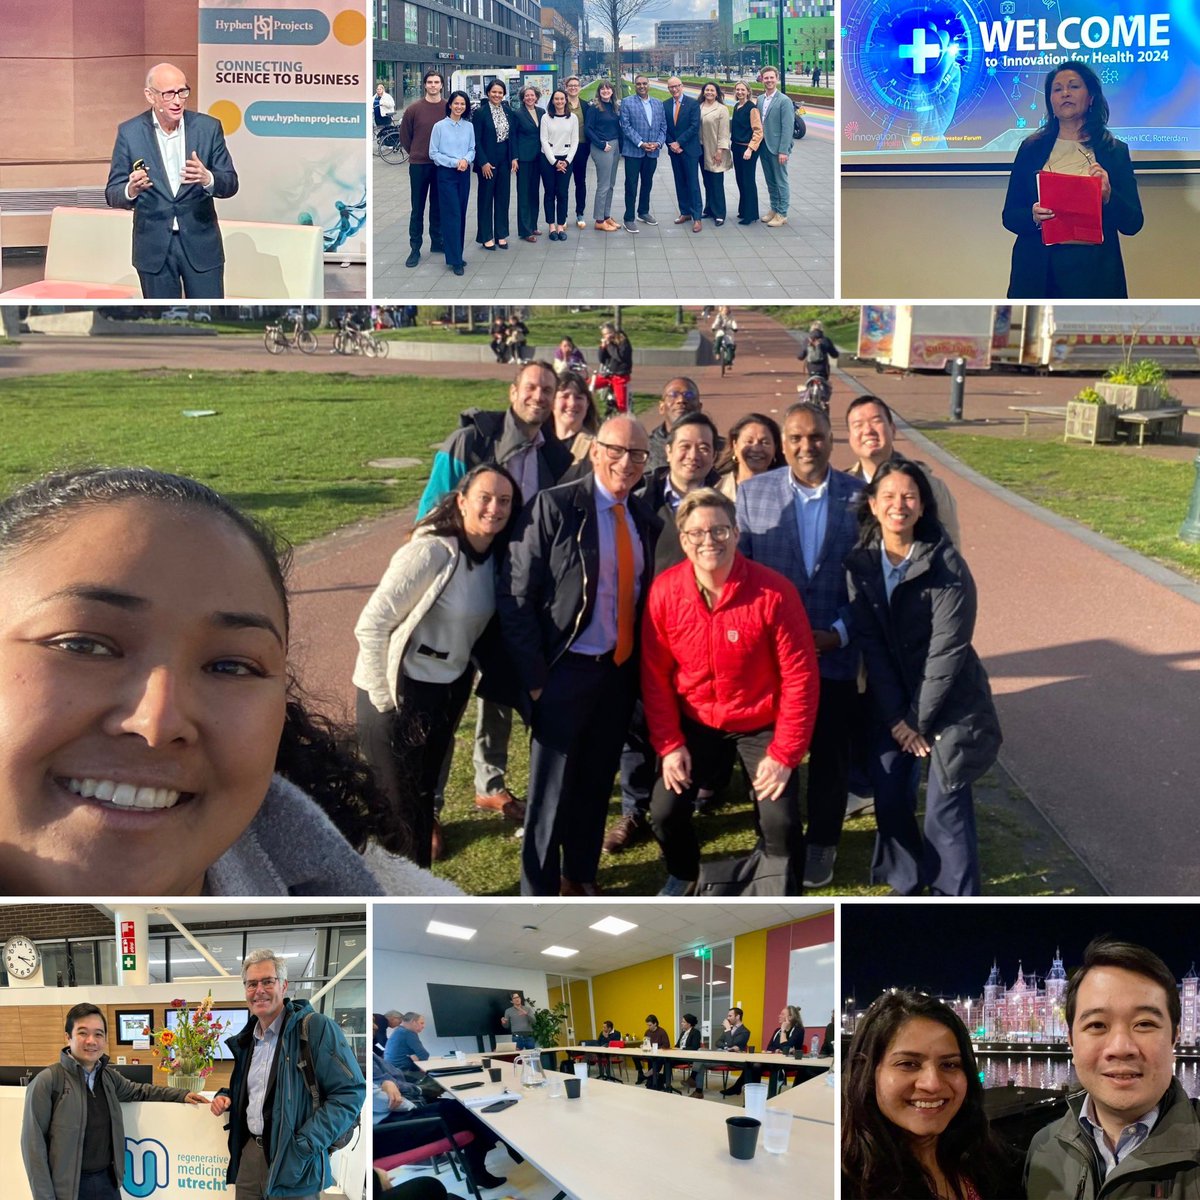 Best outcomes out of #Massachusetts delegation trip to #Netherlands were the relationships that were built + strengthened, (re)connecting w/ friends & colleagues, & exploring new opportunities! Thx @The_Termeer_Fdn @NLinBoston! #innovation #biotech #healthcare #health #medicine